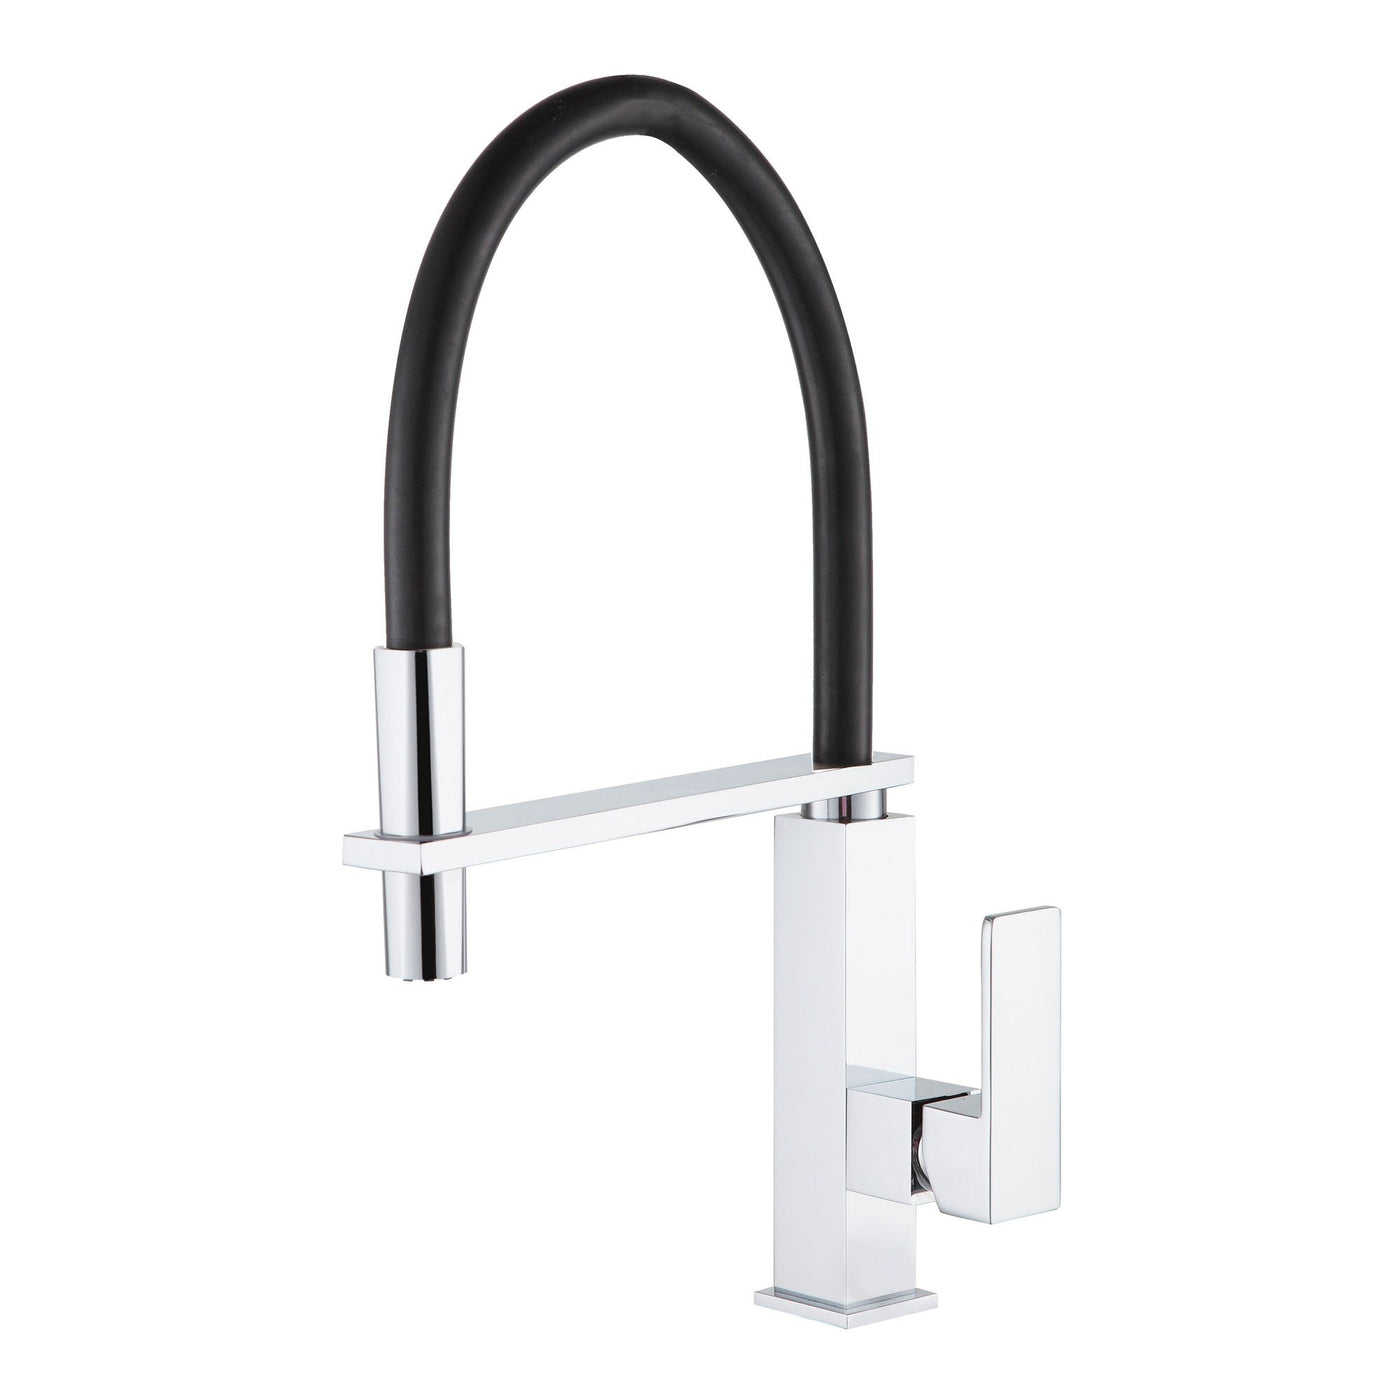 Pluto Pull-Out Kitchen Mixer